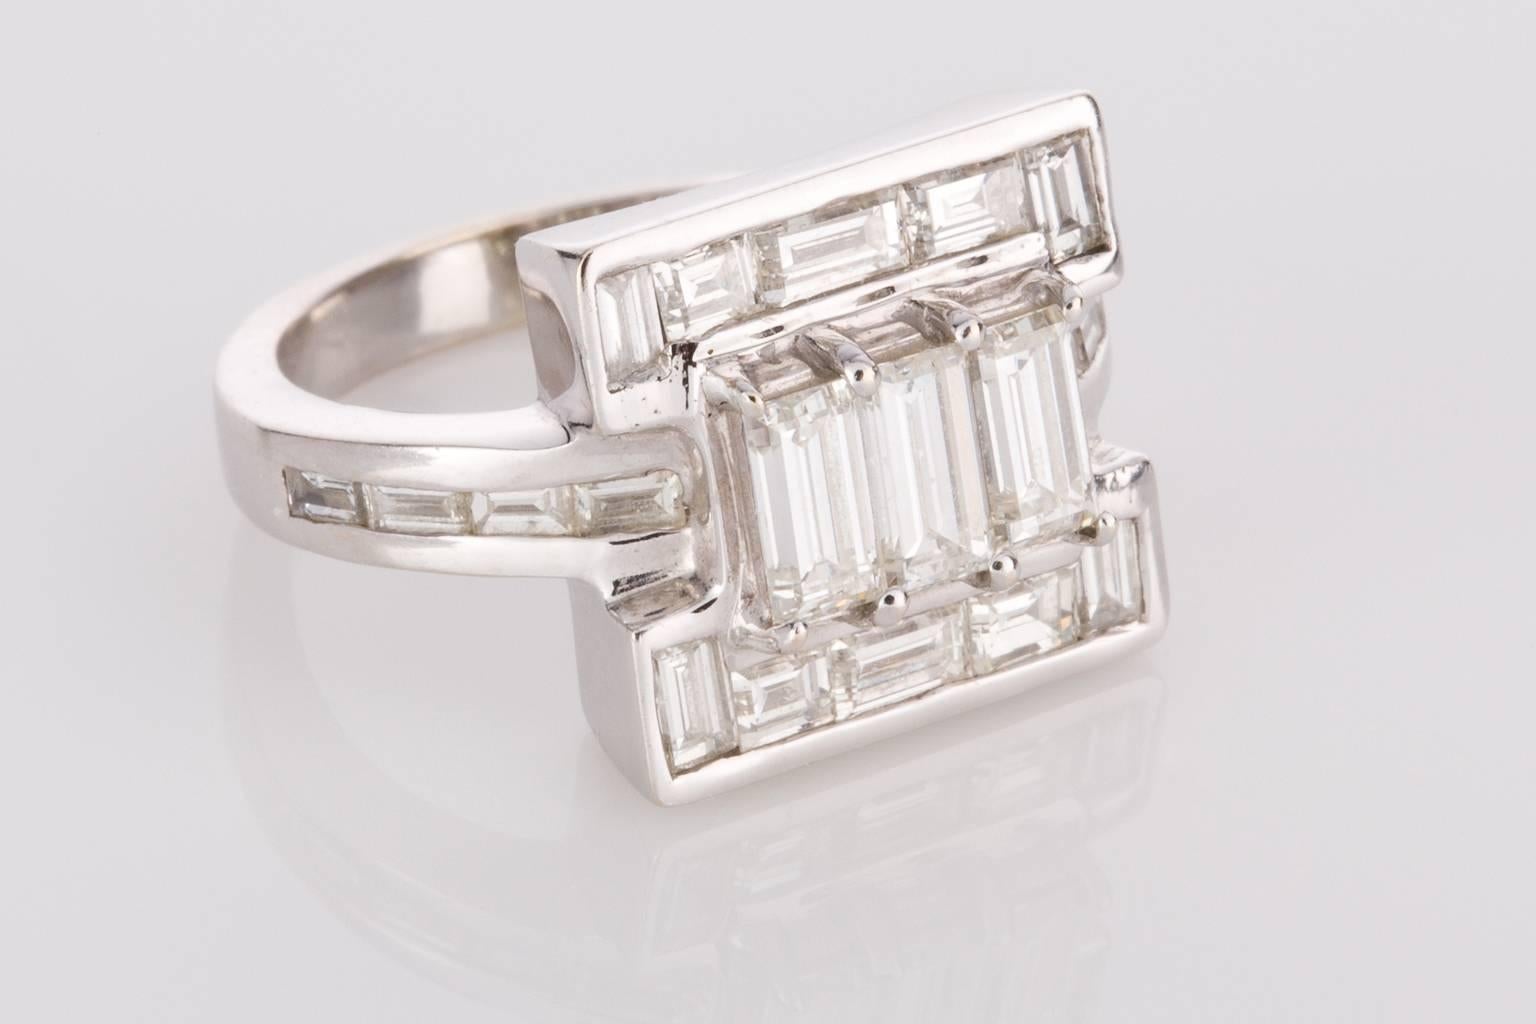 A gorgeous 18k white gold ring containing three raised claw set central baguette cut diamonds framed by five channel set baguette diamonds either side. Mounted onto a 3.20mm wide band with four channel set diamonds at the side. Total Diamond weight